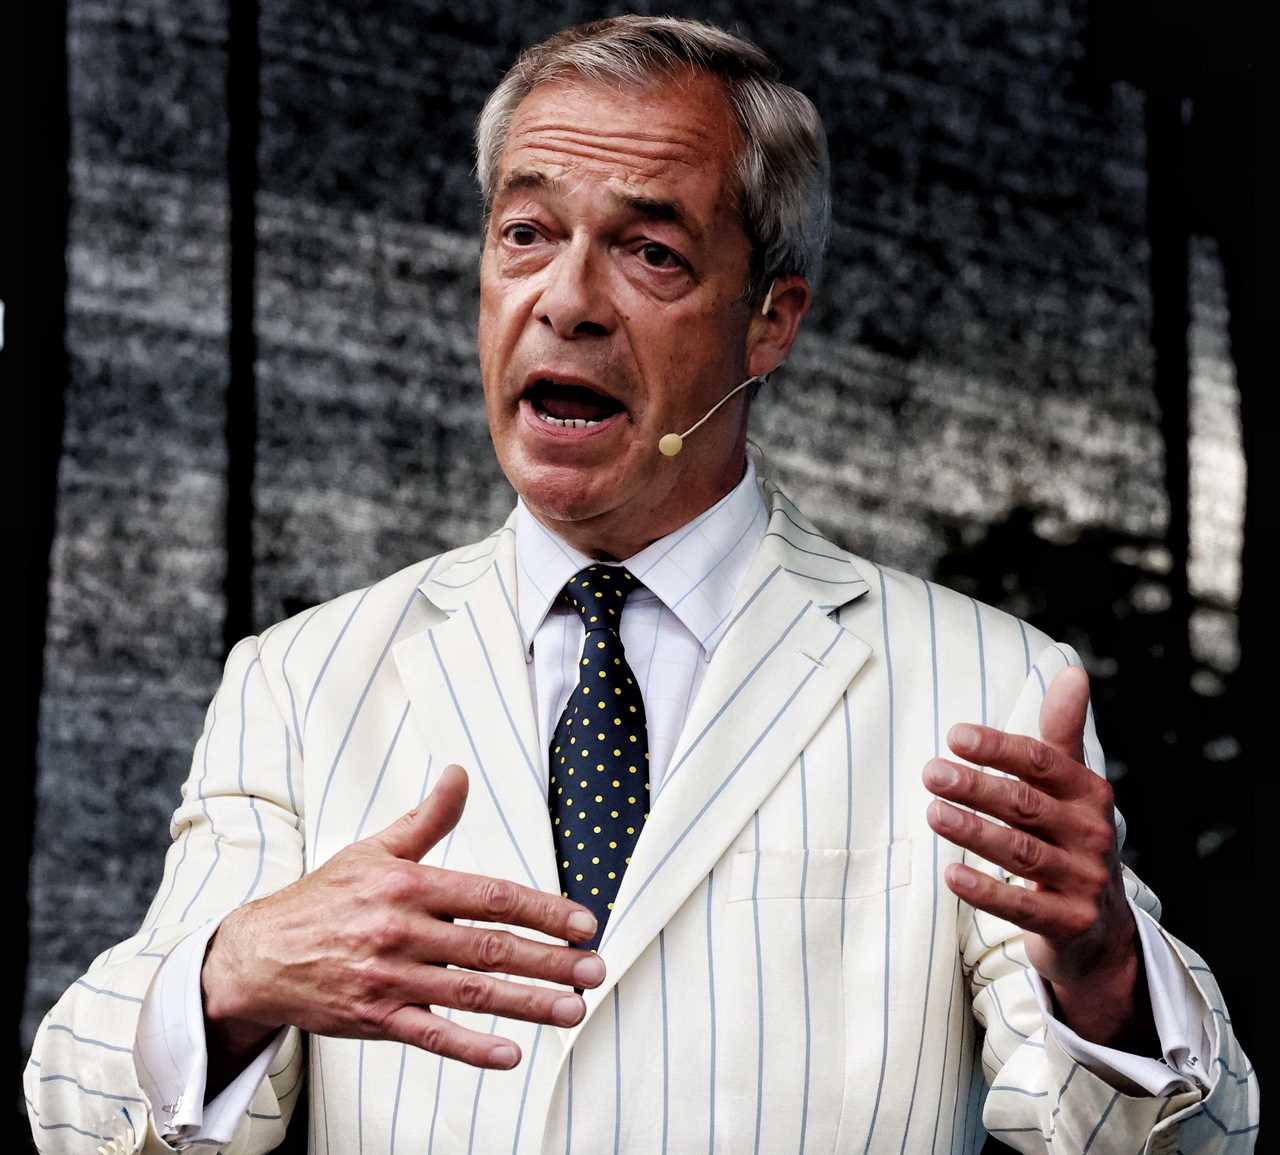 Nigel Farage accused of being a Putin appeaser by Rishi Sunak